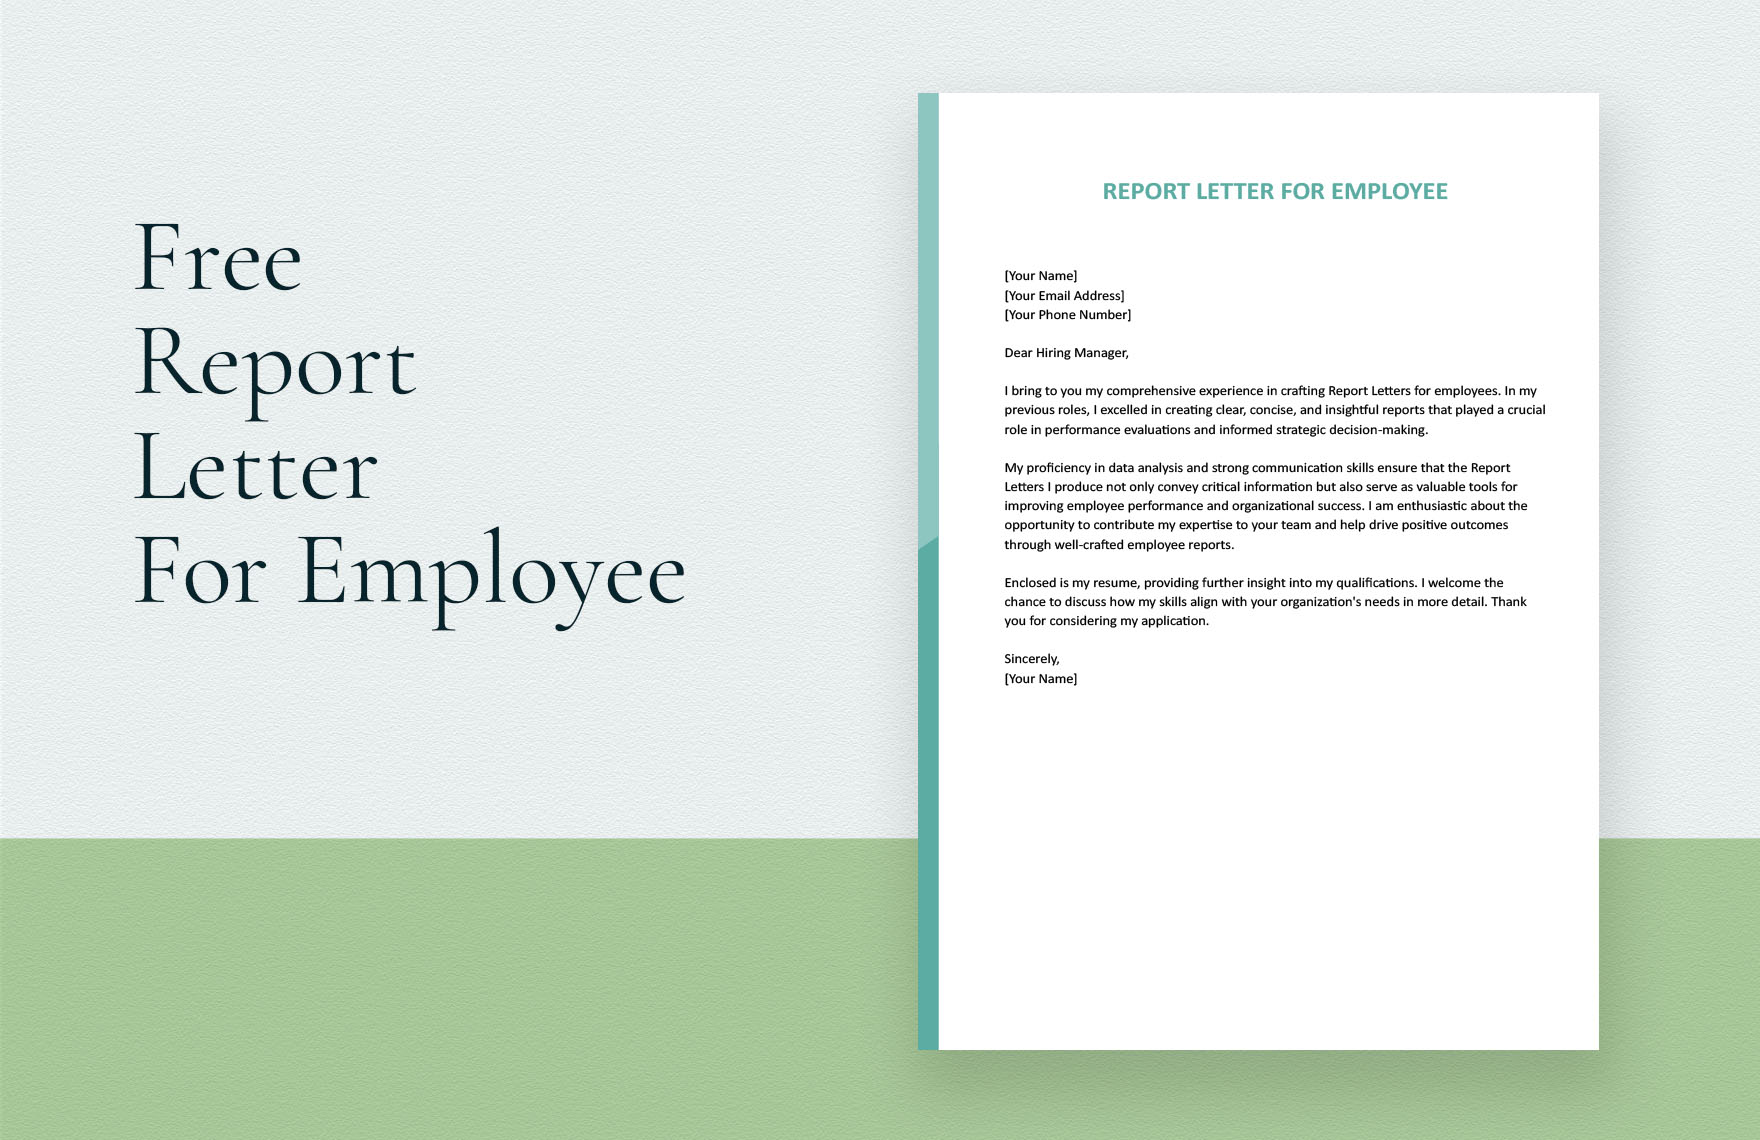 Report Letter For Employee in Word, Google Docs